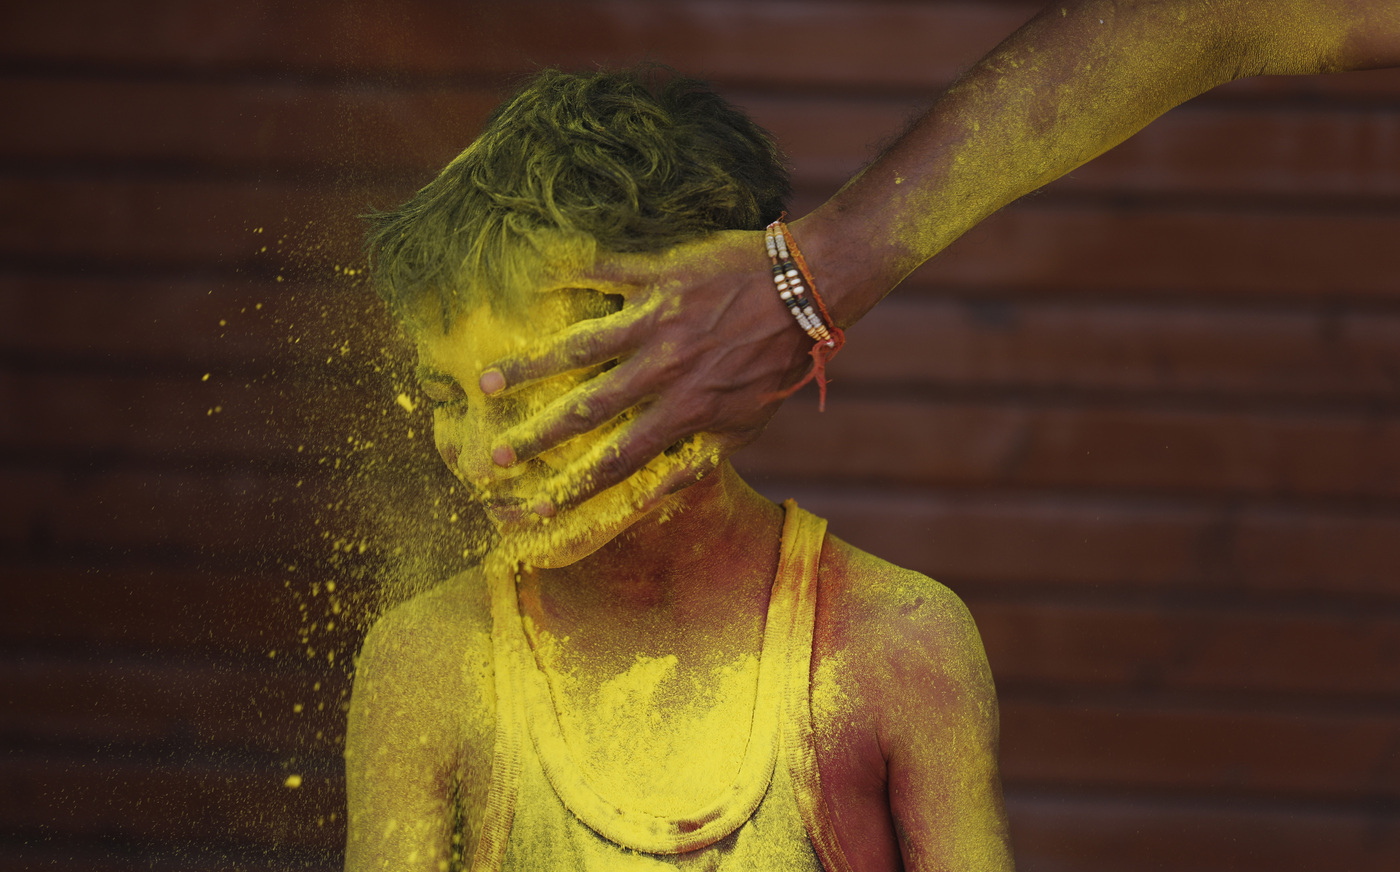 A reveller smears colored powder on a boy as they celebrate Holi in Prayagraj, in the northern Indian state of Uttar Pradesh, India, India, Friday, March 18, 2022. The festival, a celebration of warm weather, good harvests and the defeat of evil, brings out millions of people, from toddlers to the elderly, to throw powder at one another and play with water balloons and squirt guns. (AP Photo/Rajesh Kumar Singh)